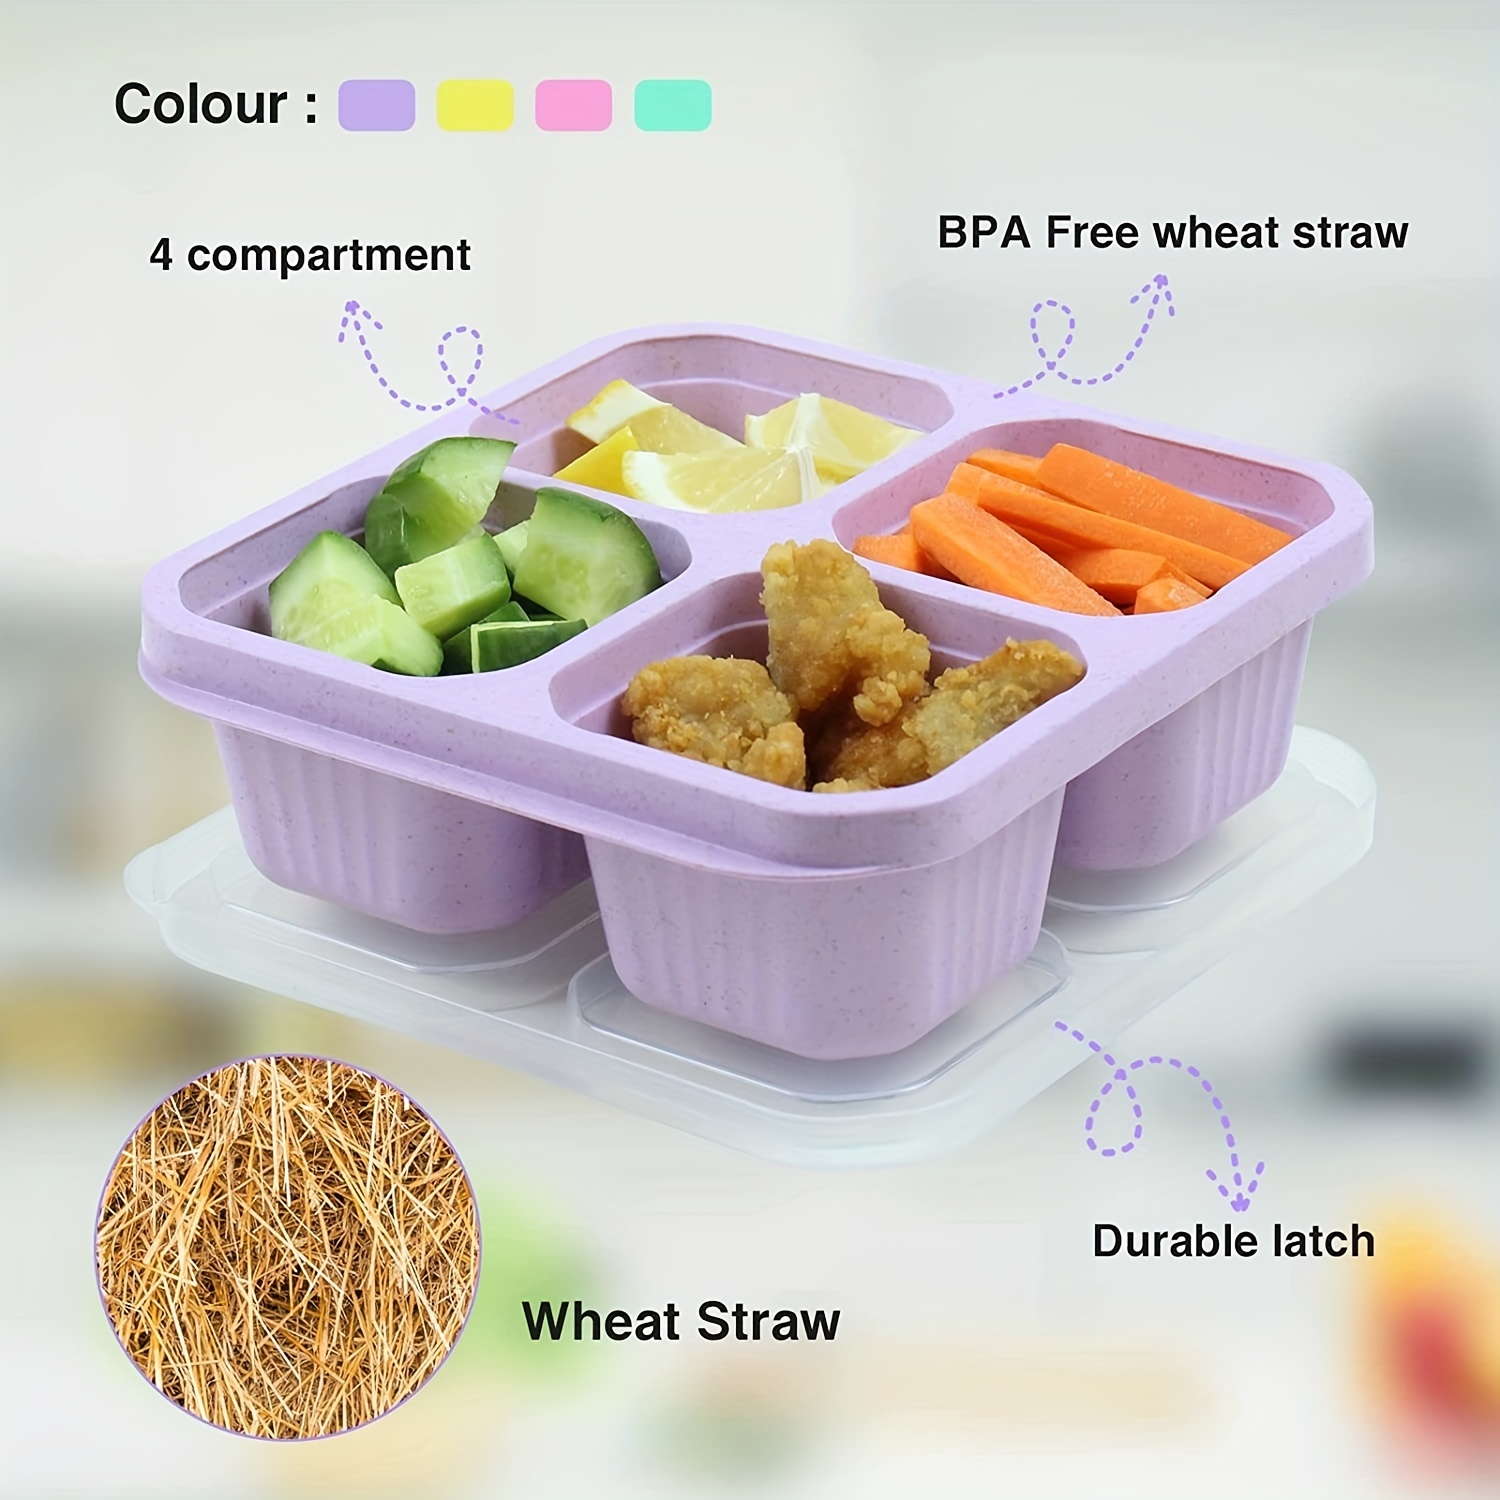 EasyLunchboxes - Bento Snack Boxes - Reusable 4-Compartment Food